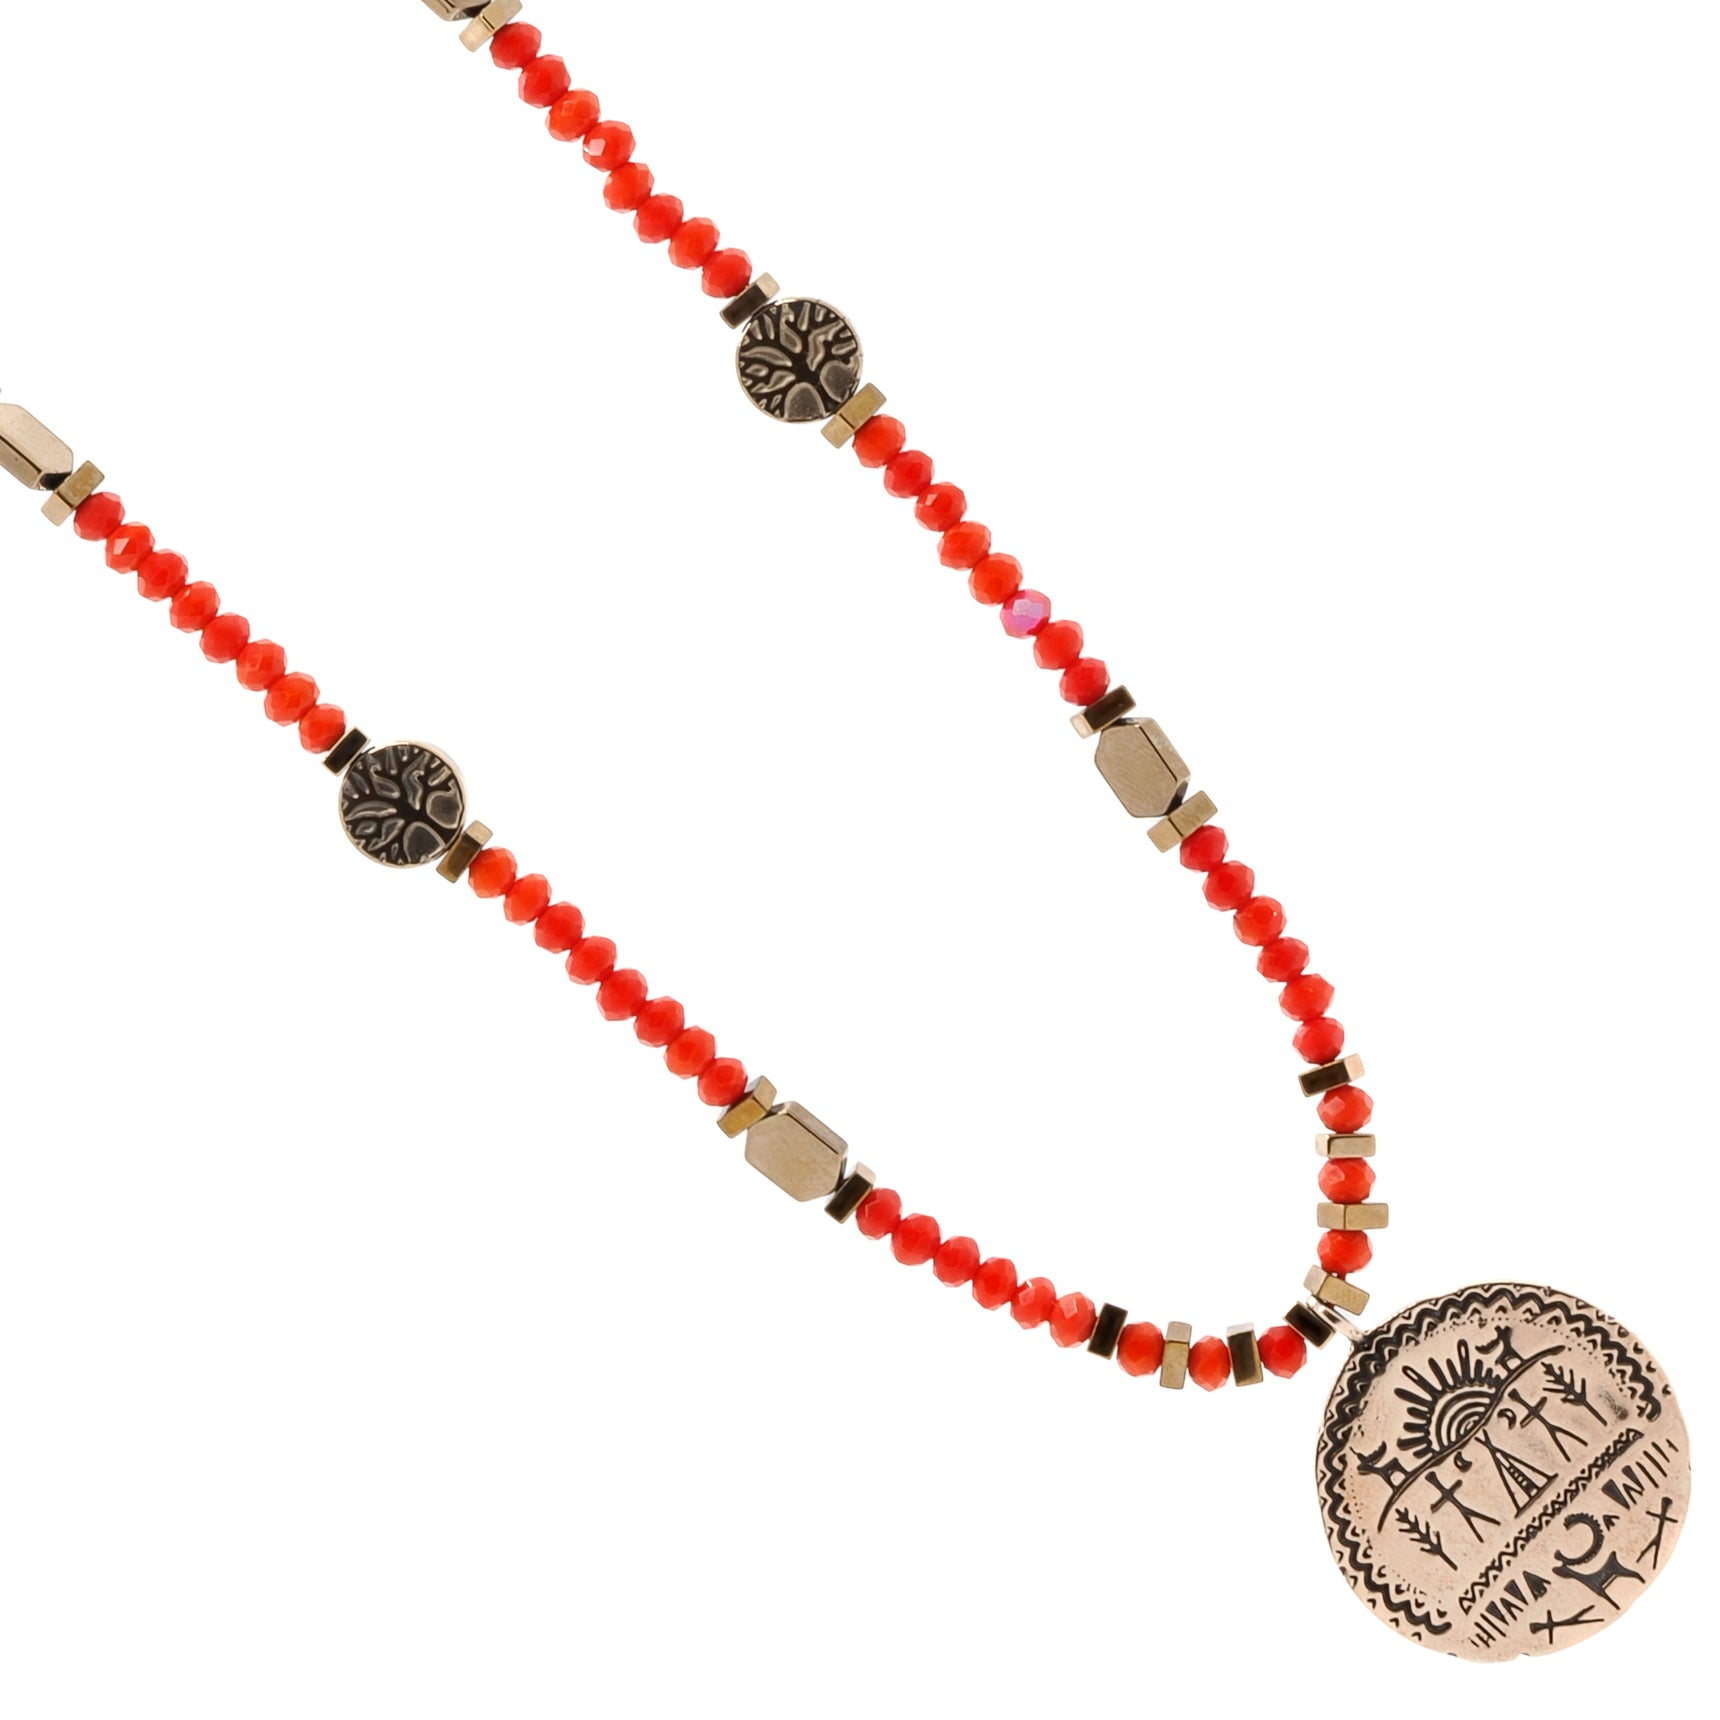 Enhance your Look with the Handcrafted Shaman Necklace